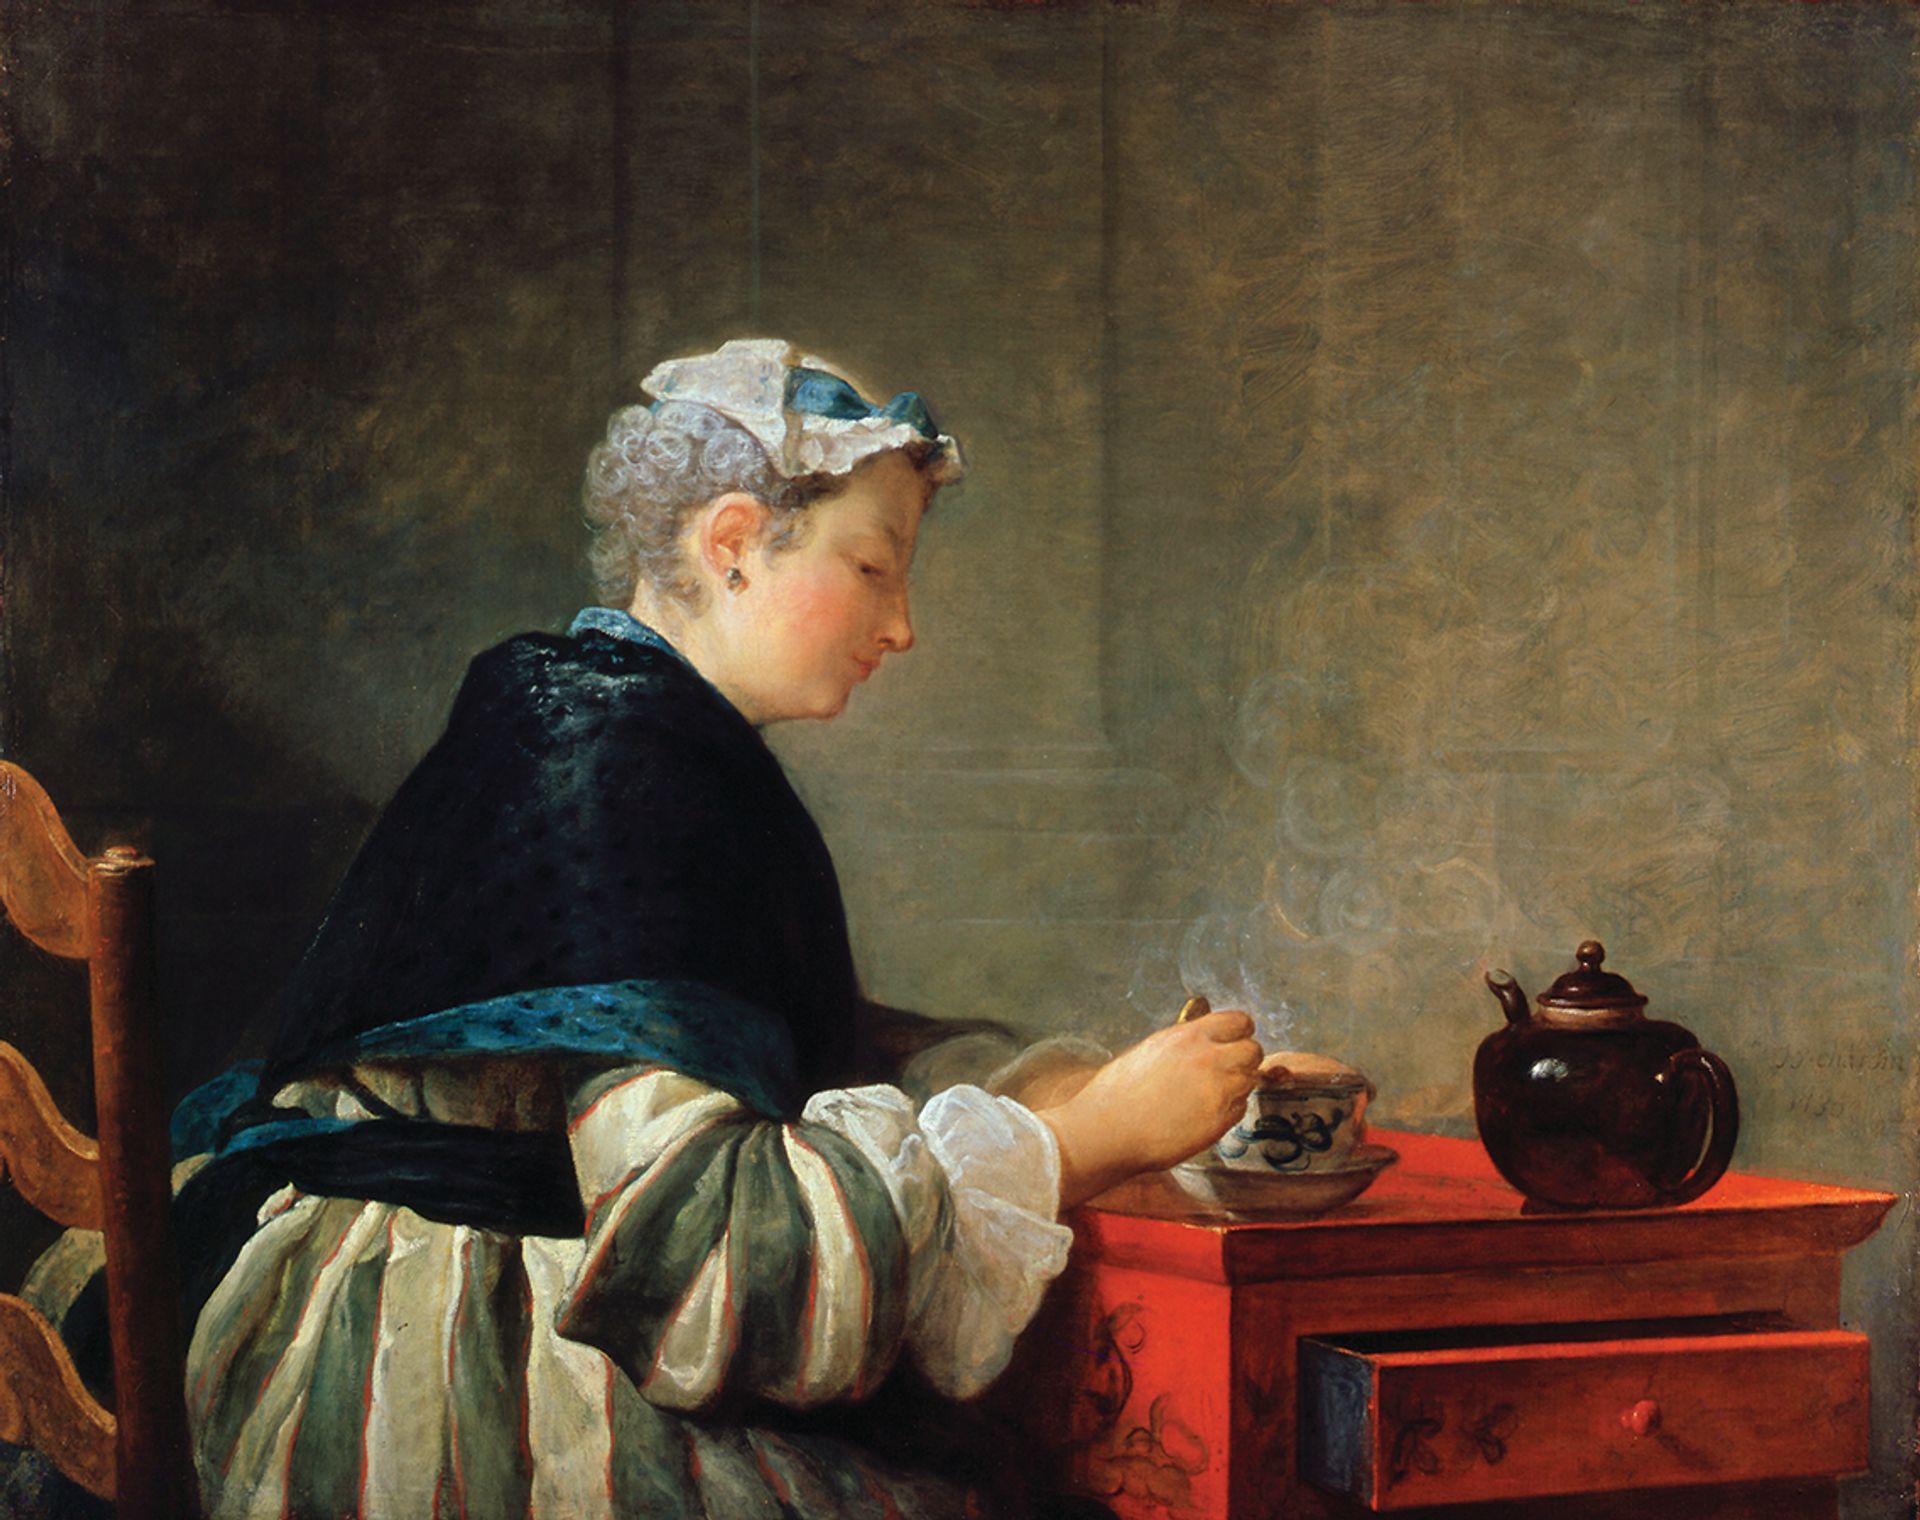 Not ornaments, but integral to William Hunter’s collecting: Chardin’s A Lady Taking Tea is a masterpiece of Enlightenment empirical thinking Courtesy of the Hunterian, University of Glasgow